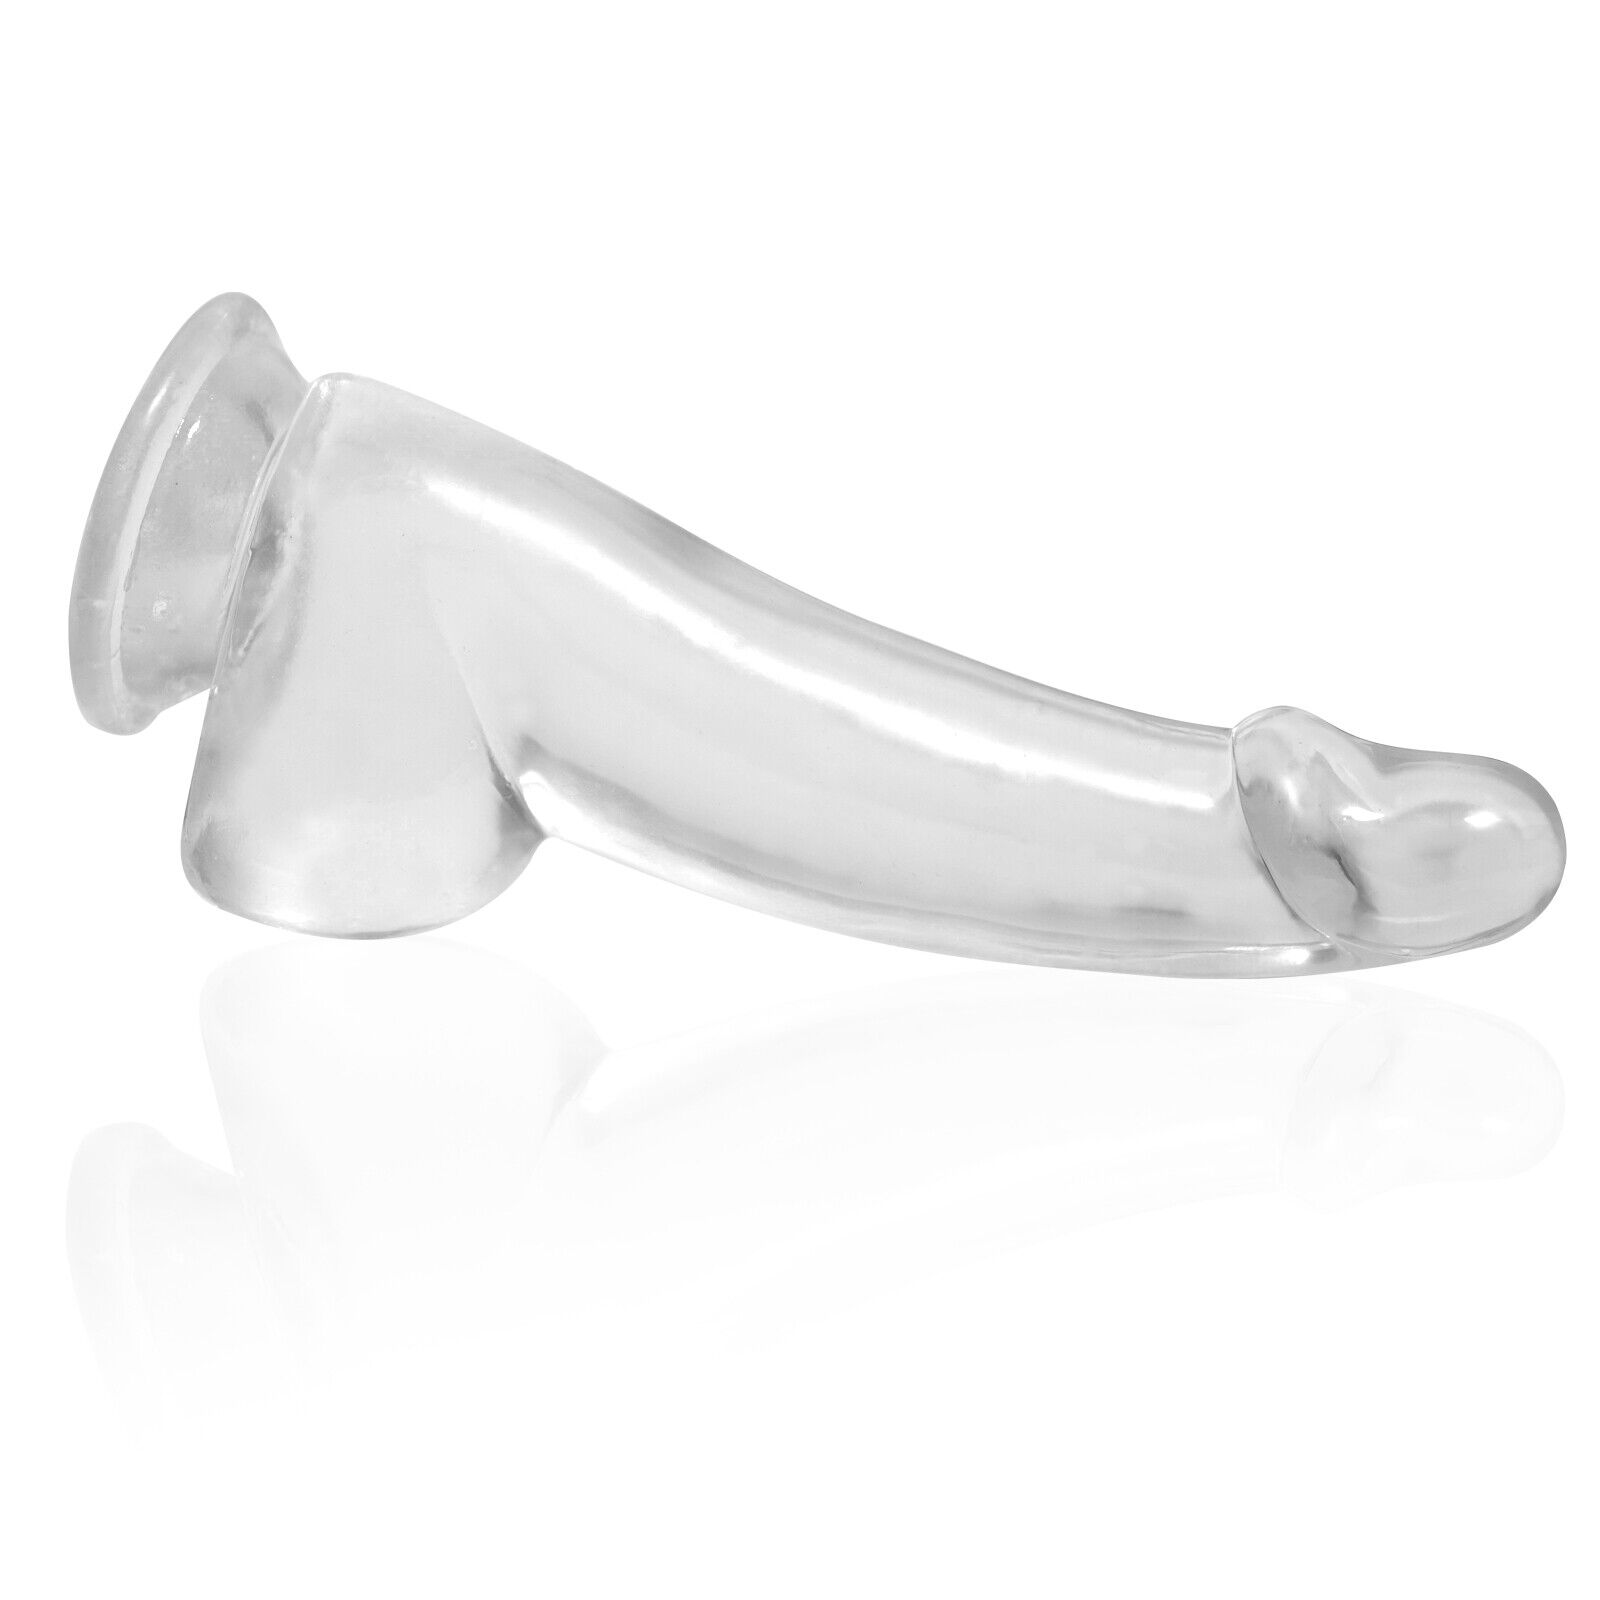 Realistic Jelly Dildo8.66 with Strong Suction-Cup Flexible Harness Compatible